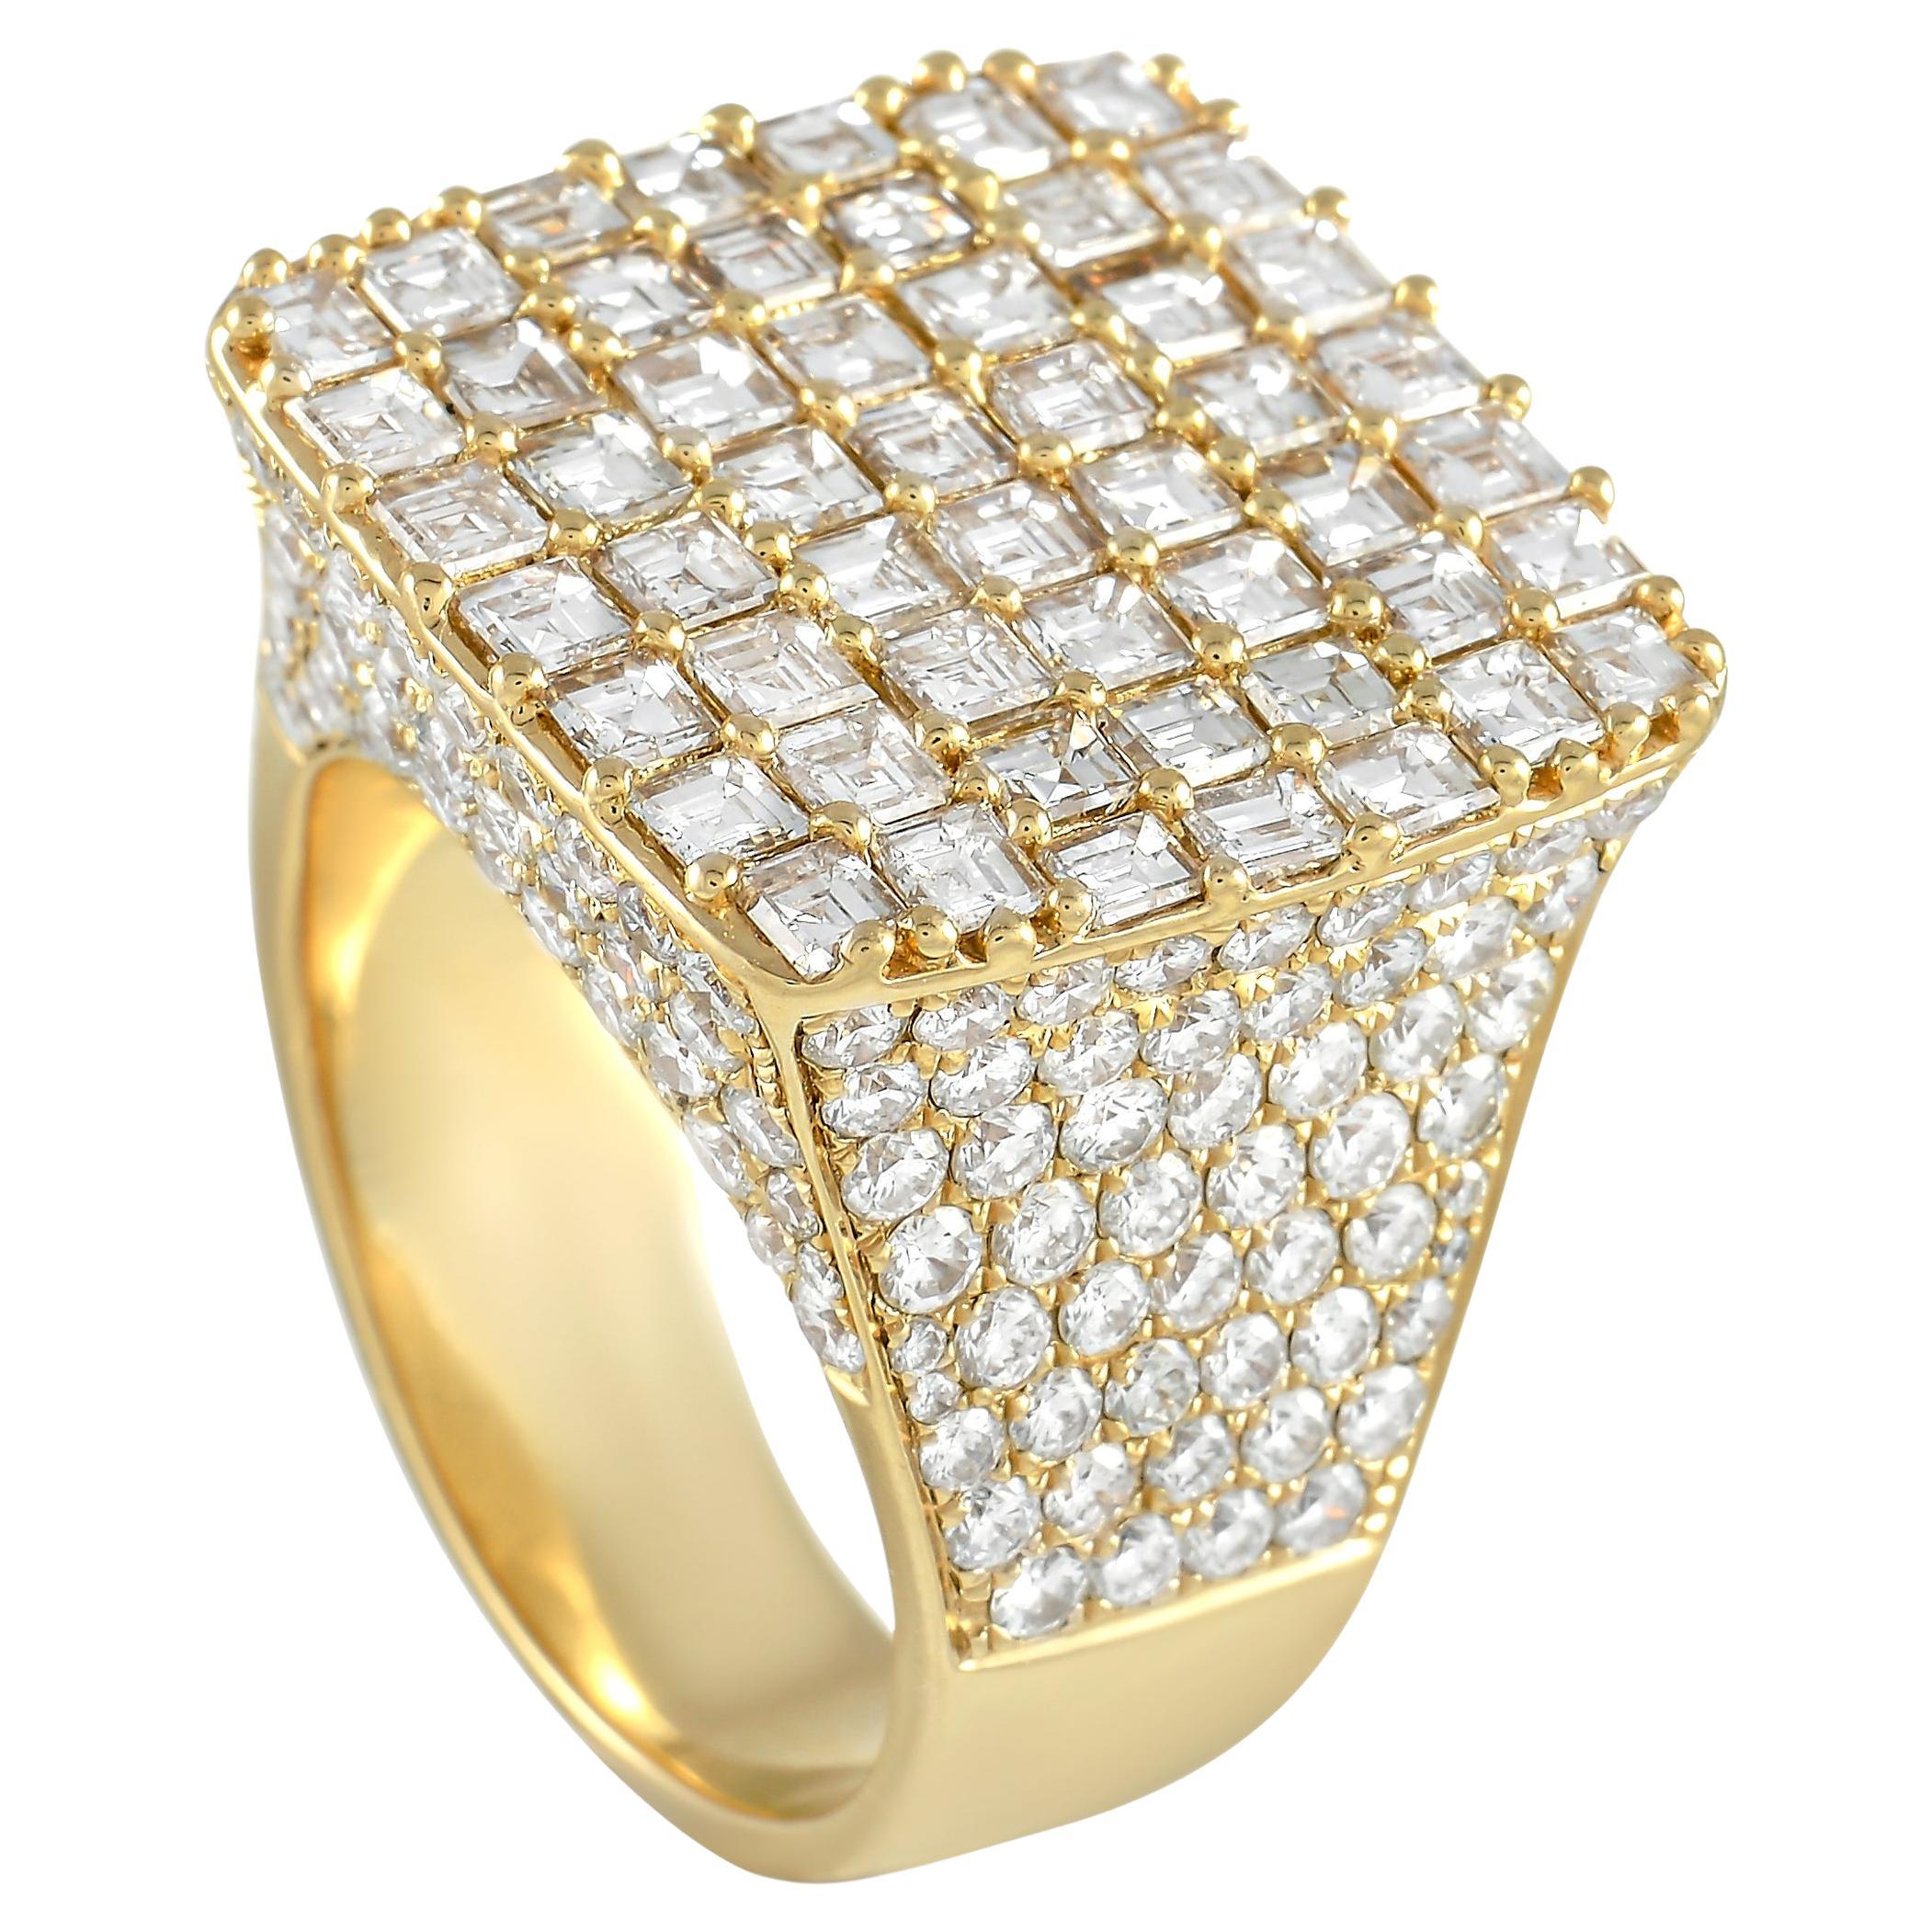 LB Exclusive 14K Yellow Gold 10.49 Ct Diamond Ring For Sale